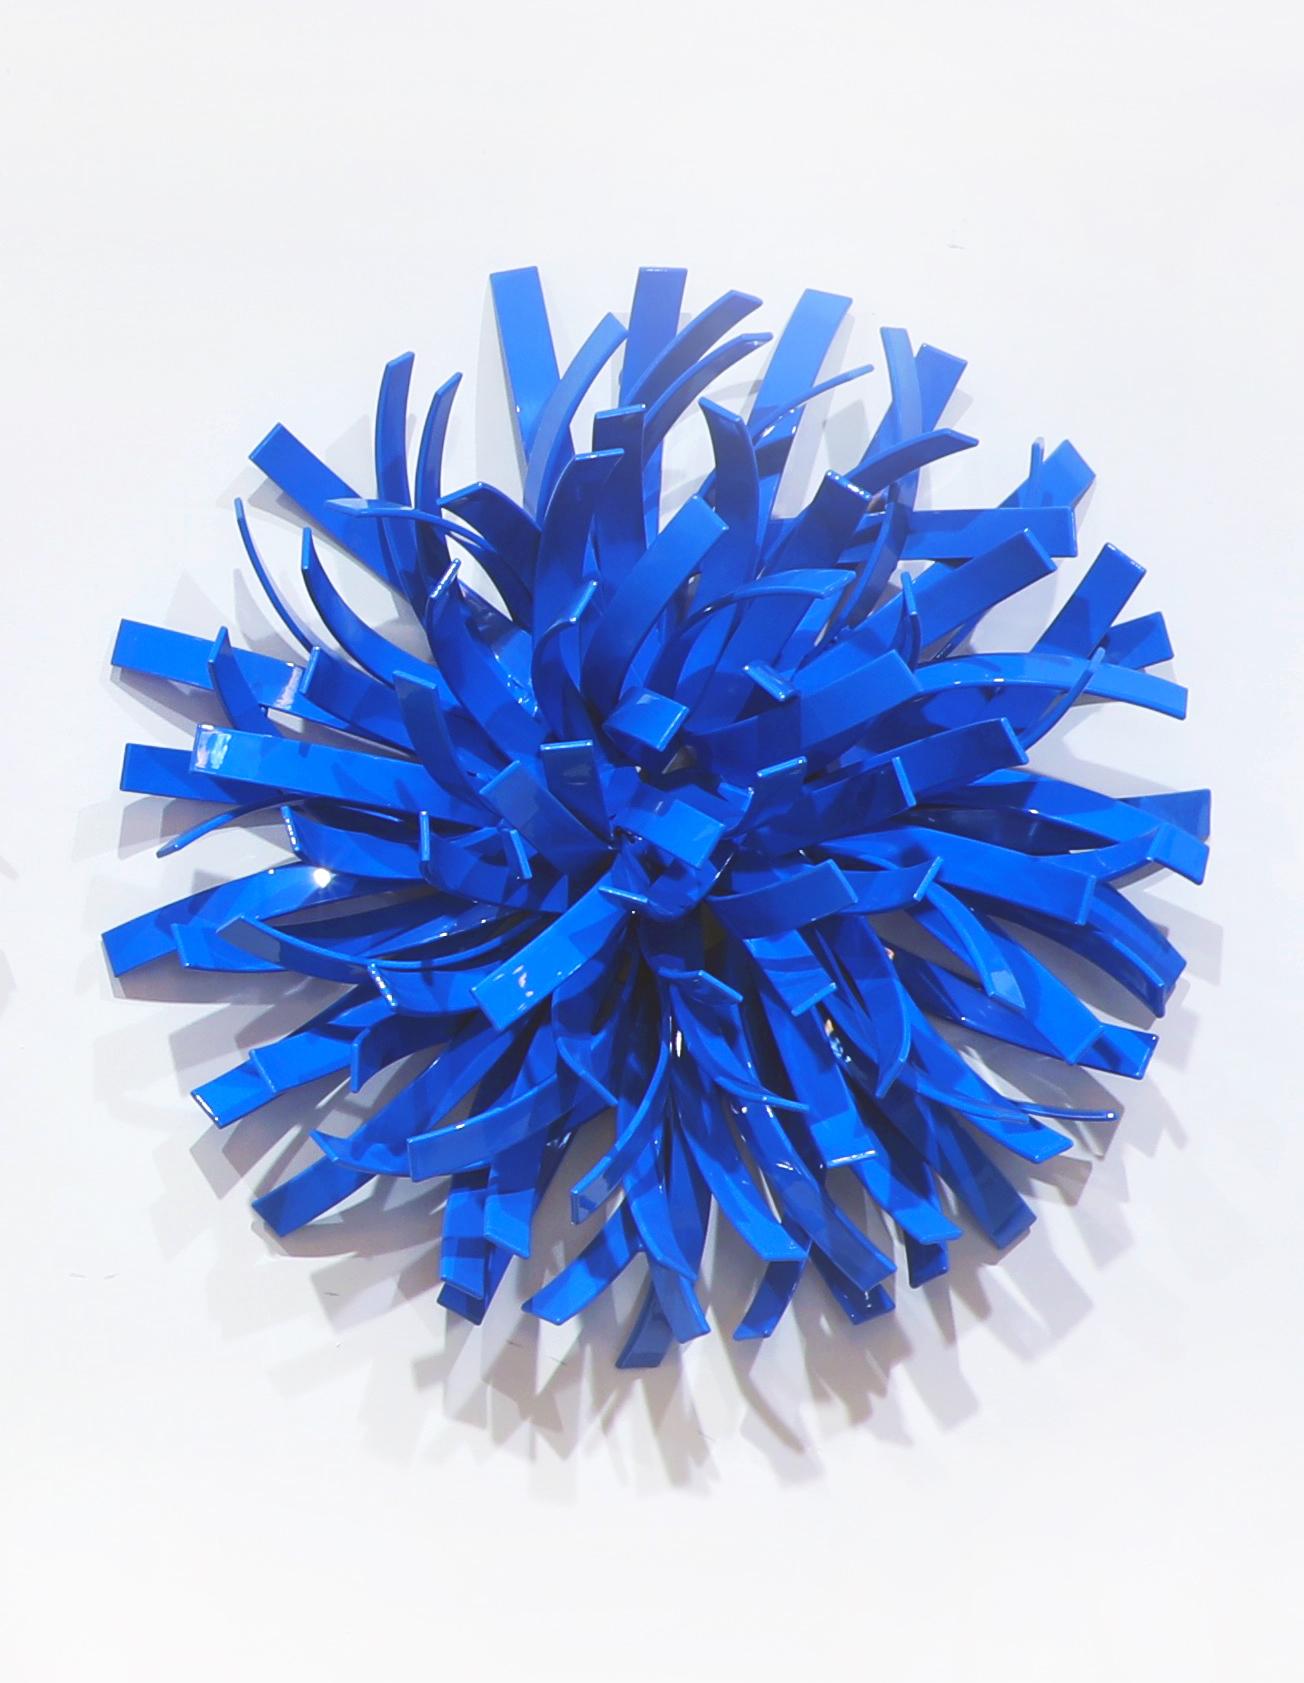 MATT DEVINE
"Anemone (Blue)"
Steel with Powdercoat (Indoor Only)
17 x 17 in. 
*Can be installed on wall or placed on table*


Matt Devine is a self-taught sculptor working with steel, aluminum and bronze. Born and raised in Salem, Massachusetts in